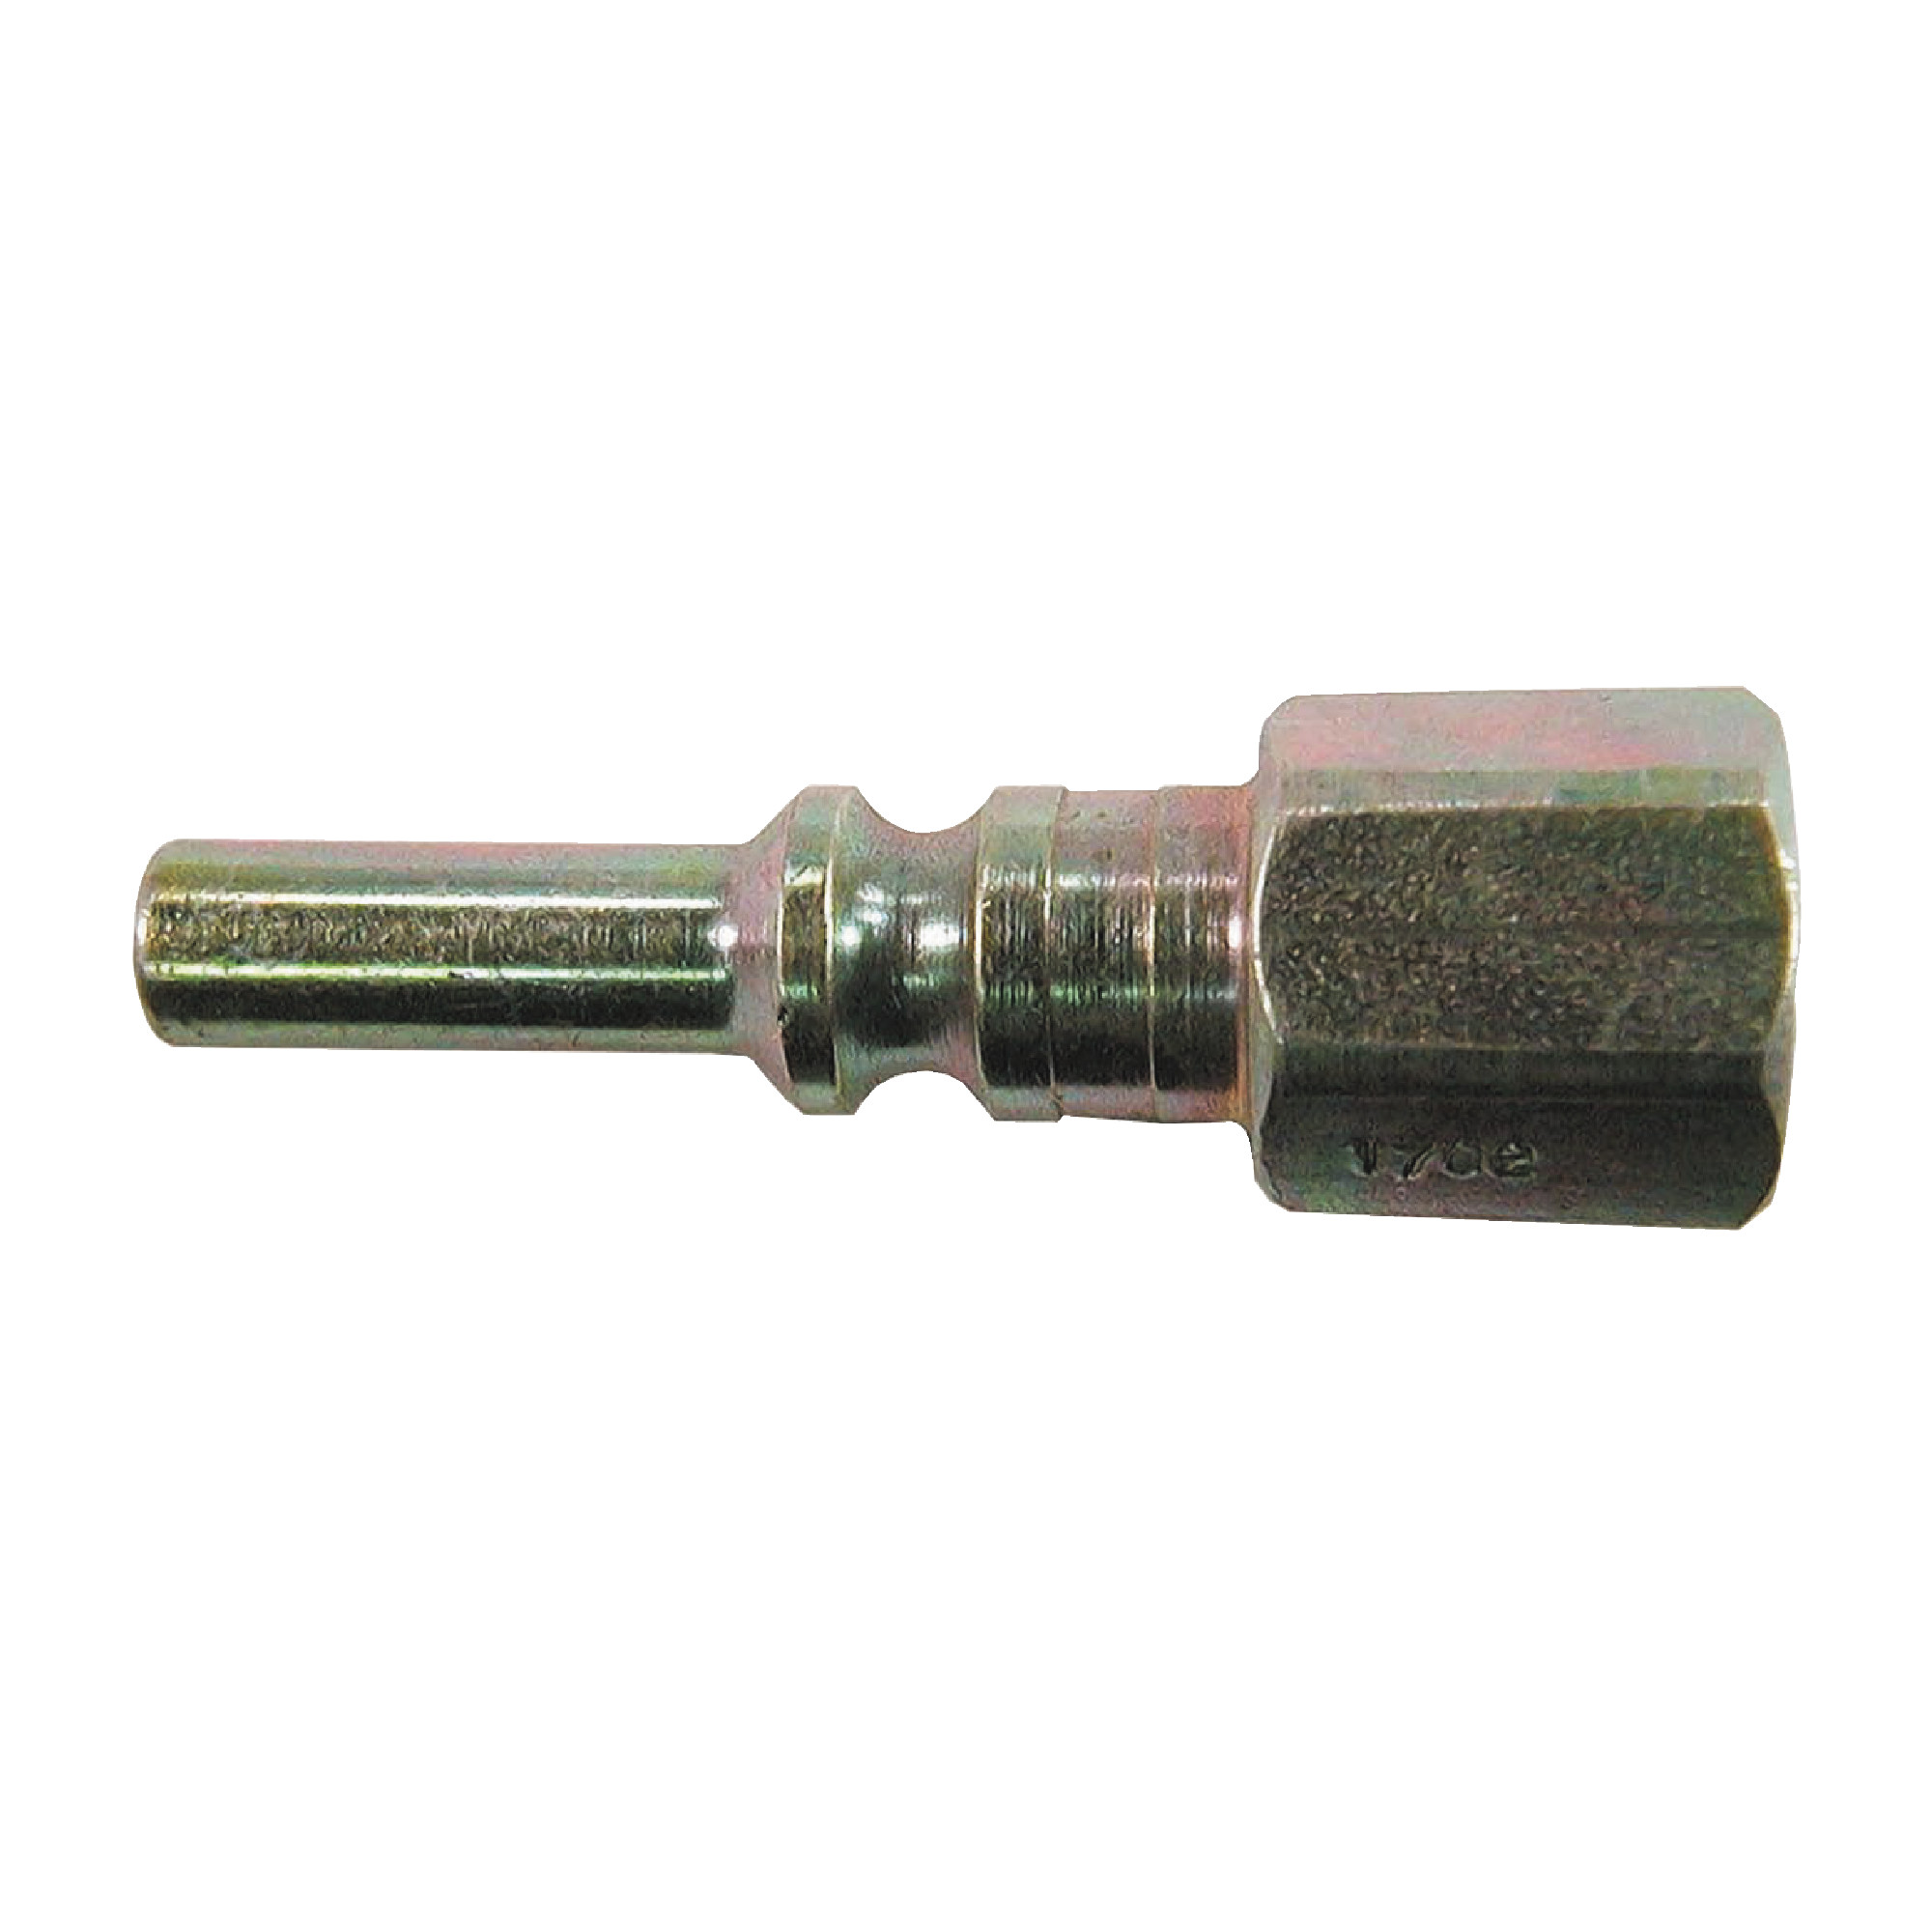 1/4" Lincoln Connector, 1/4" FPT